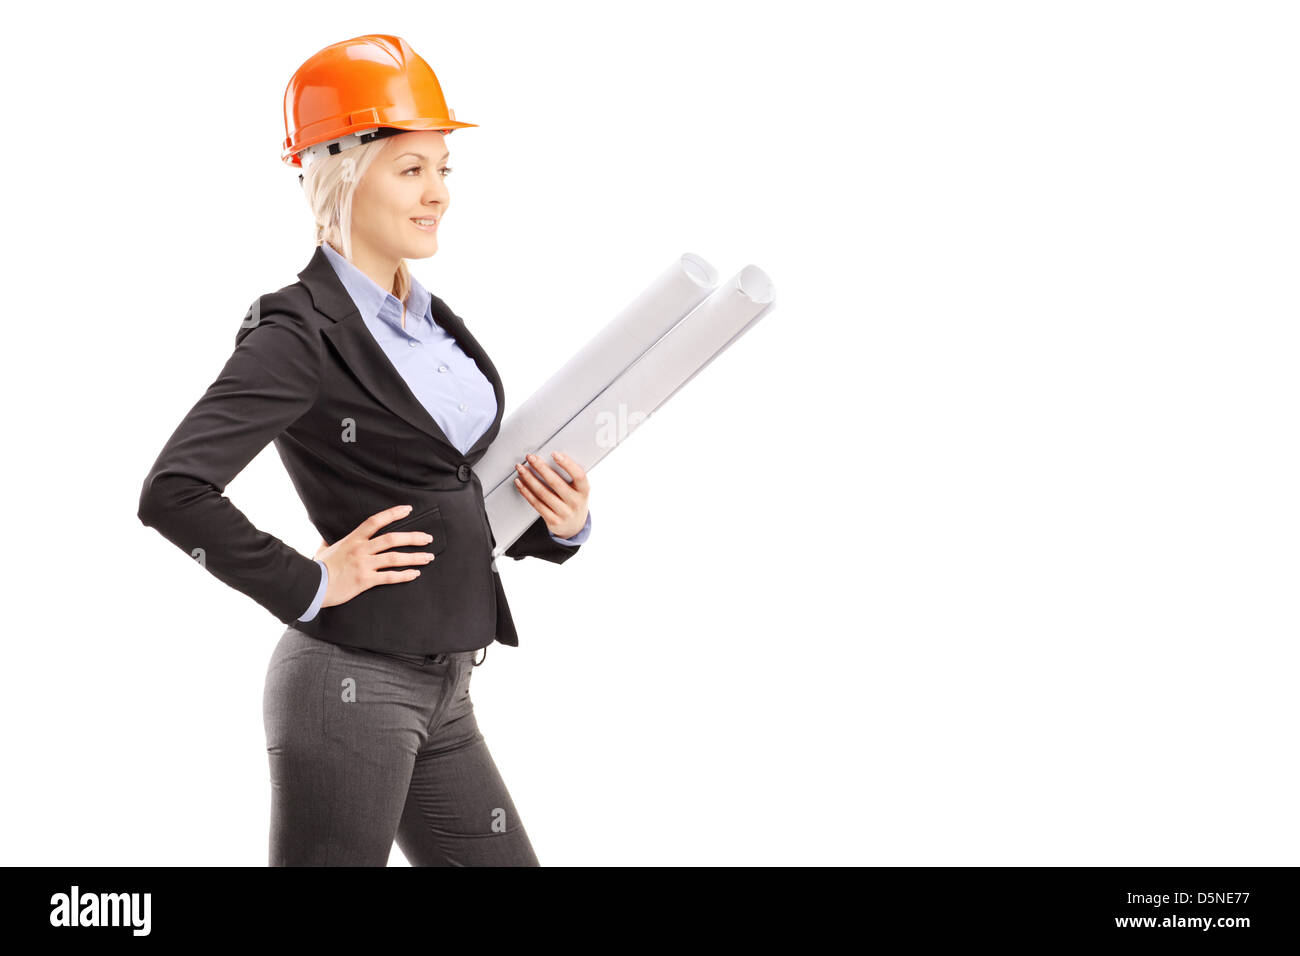 A female architect wearing an orange helmet and holding a blueprint isolated on white background Stock Photo